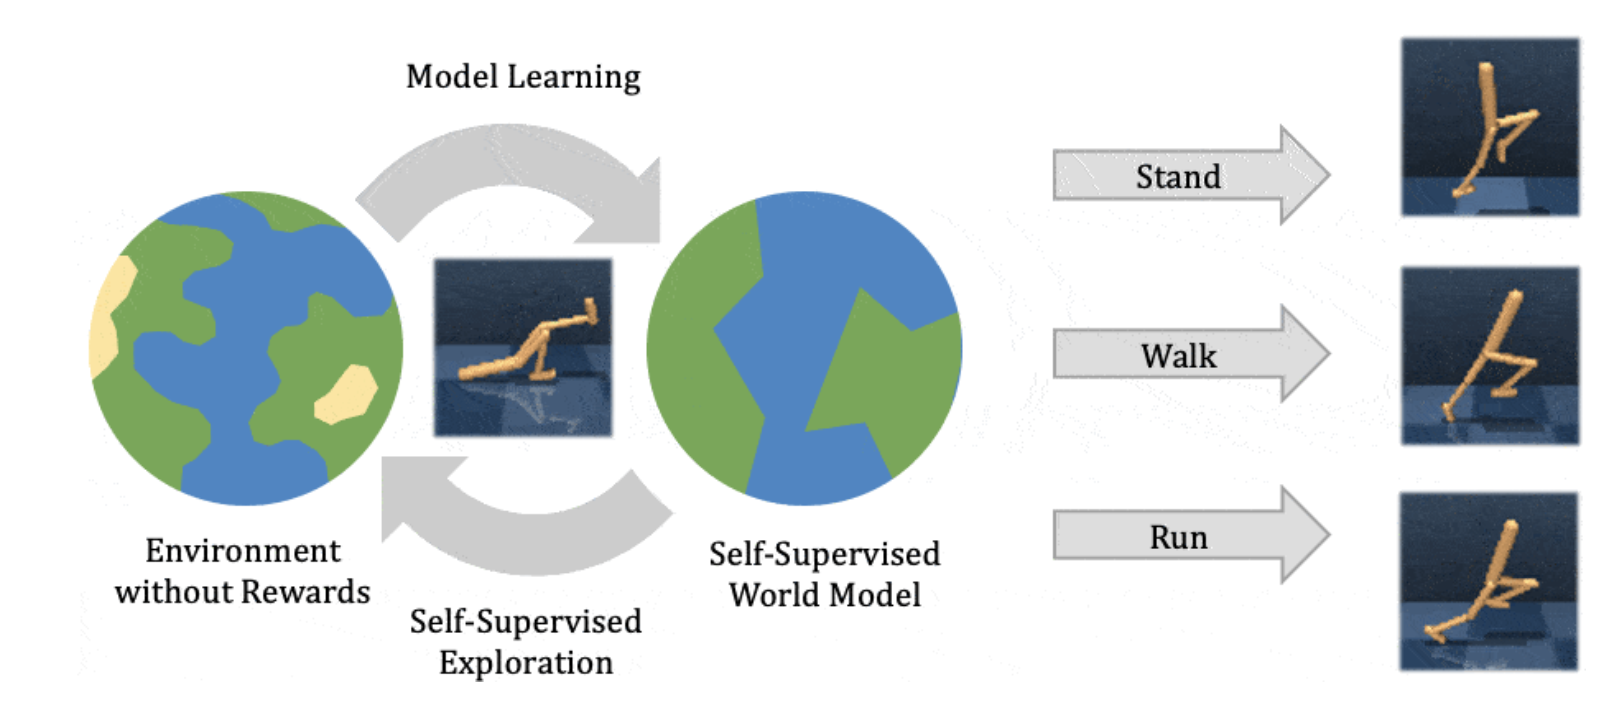 What Is Self-Supervised Learning?